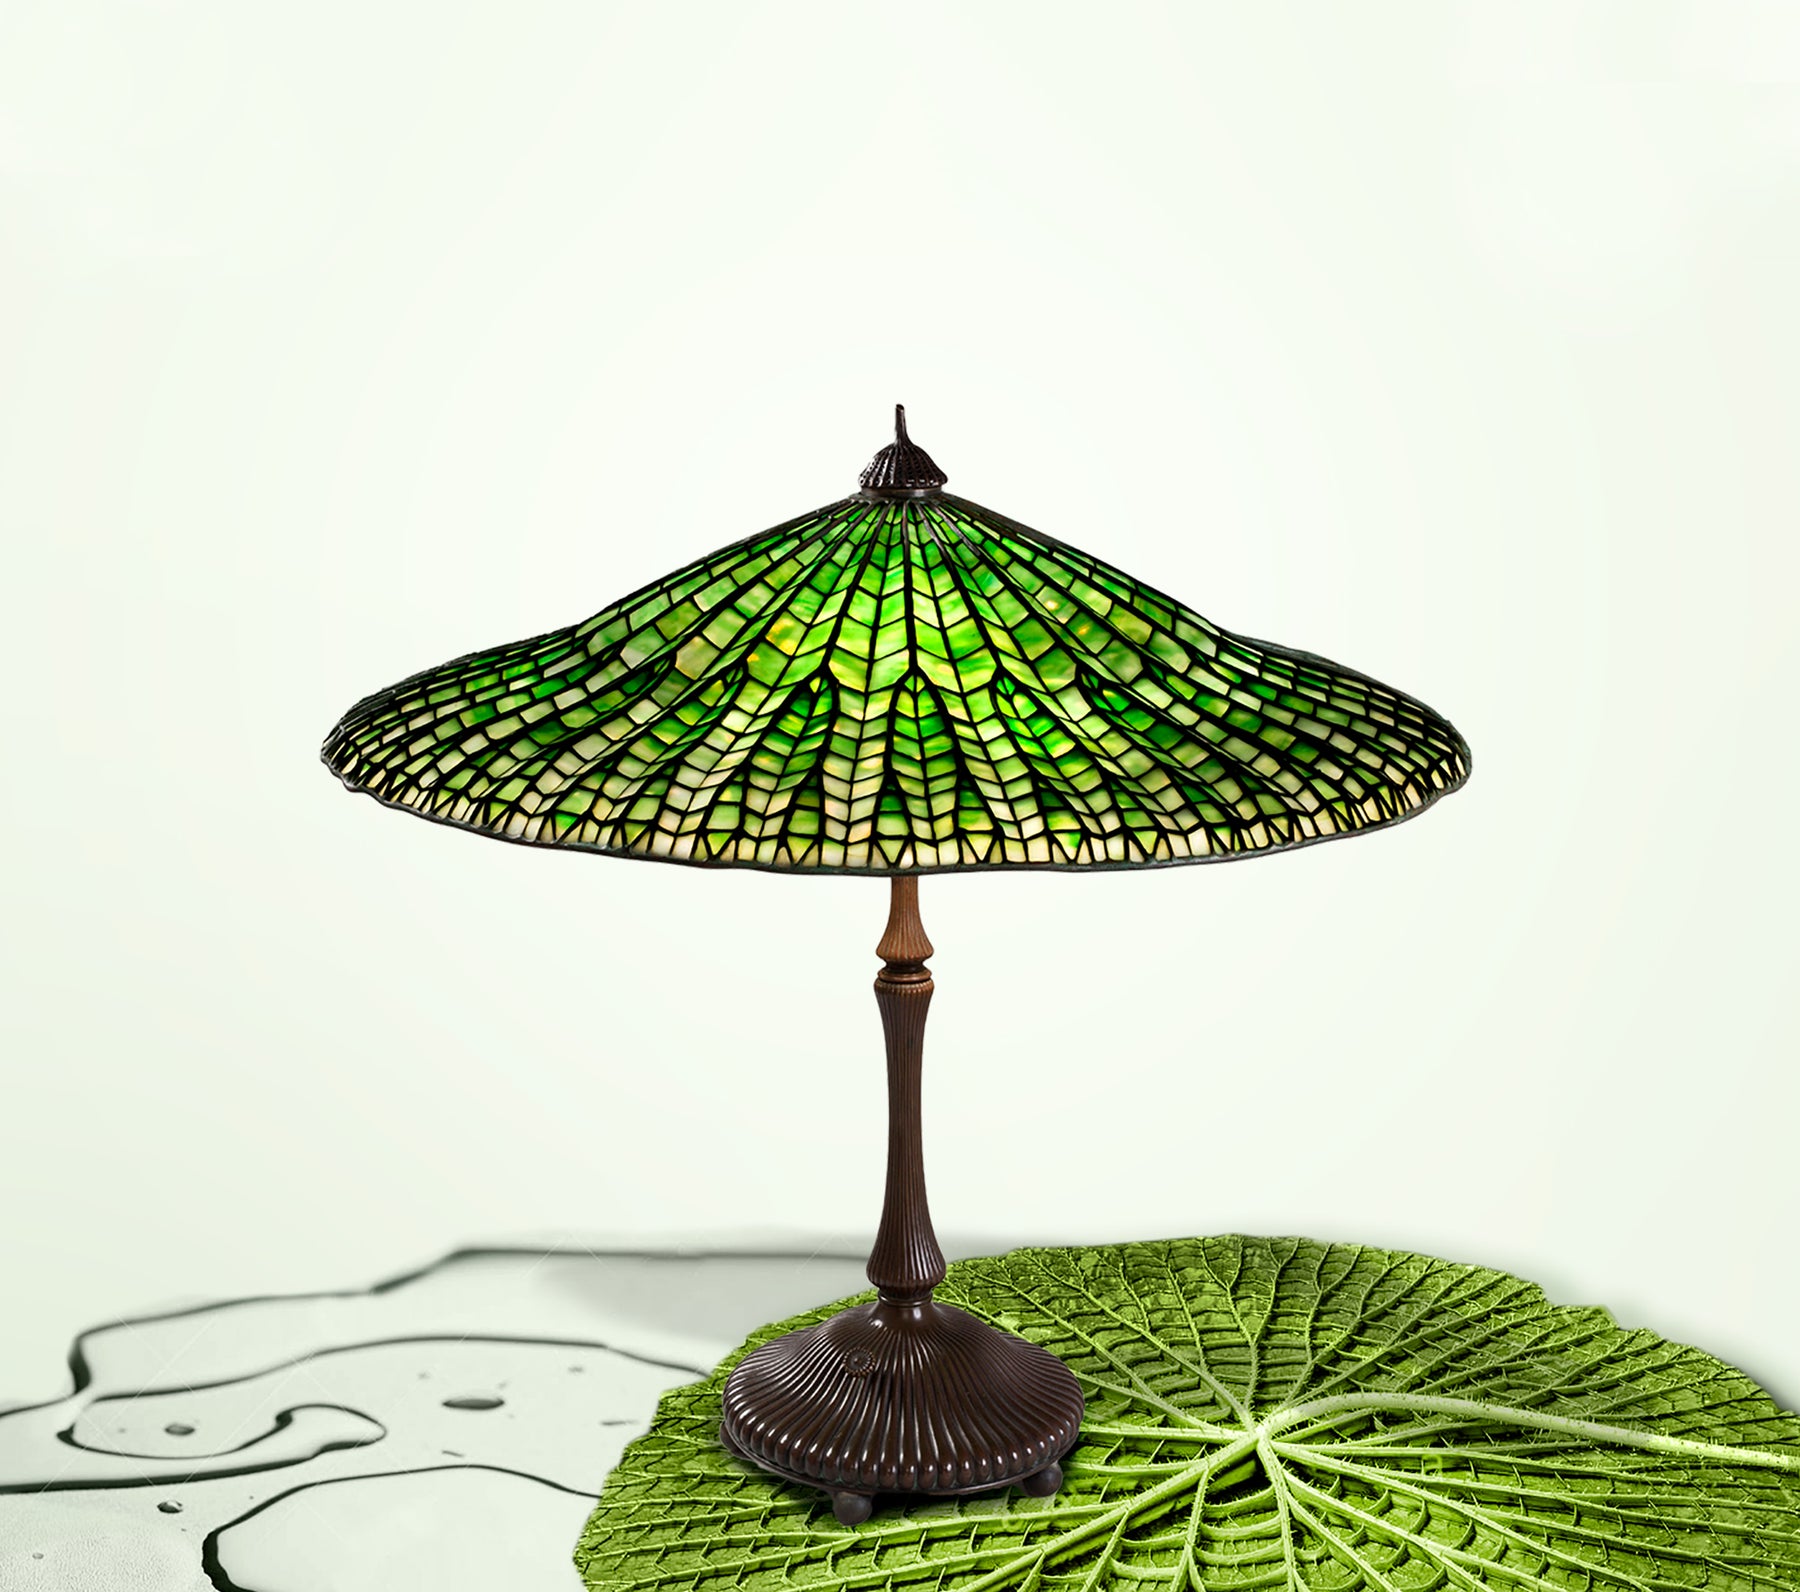 Collectors' Guide: The 4 Distinct Styles Of Tiffany Lamps